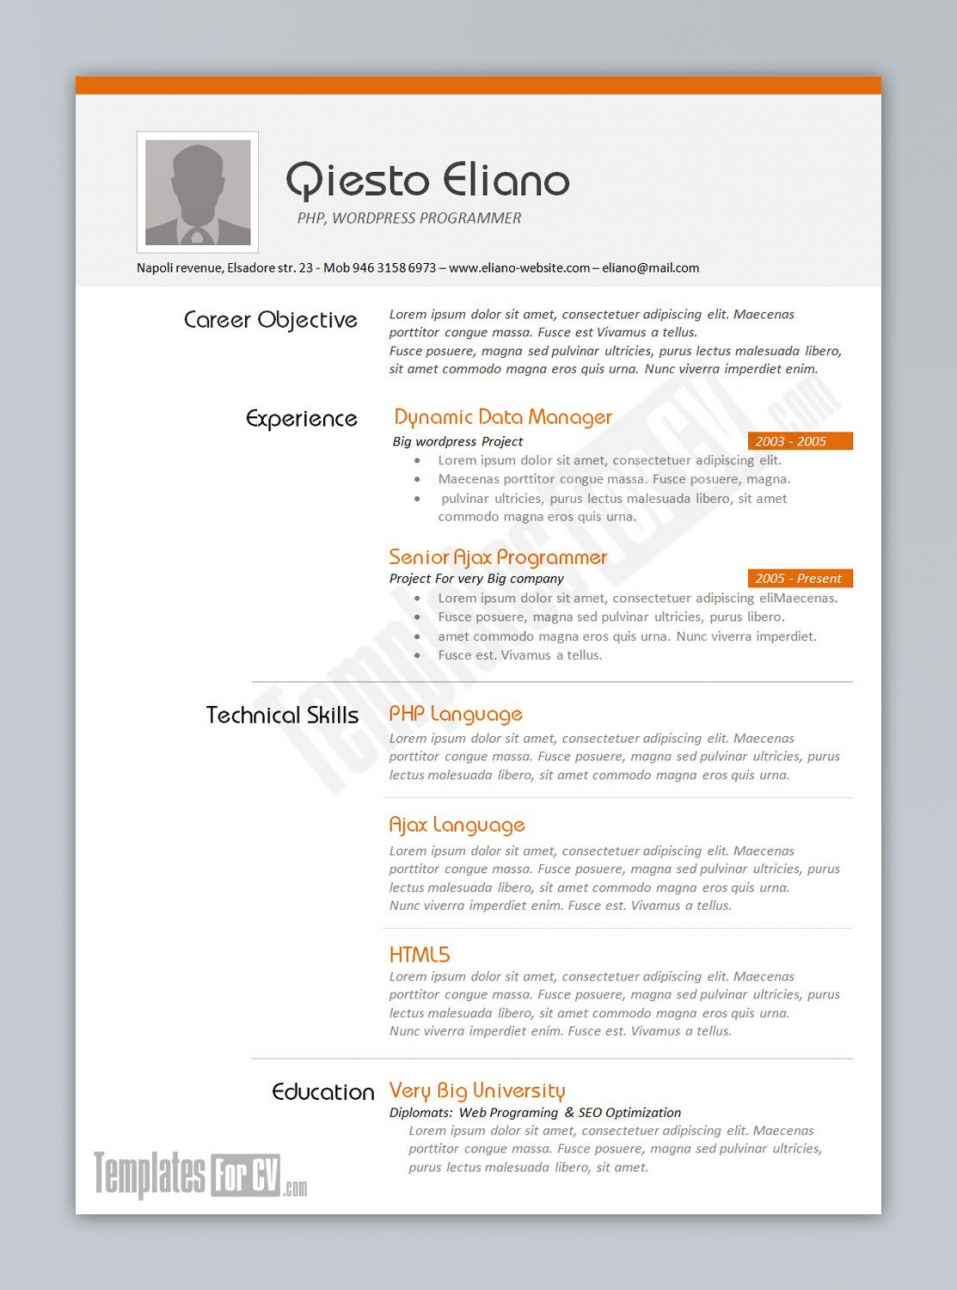 Free Downloadable Resume Templates Resume Examples Great 10 Ms Word Resume Templates Free Download 8 free downloadable resume templates|wikiresume.com